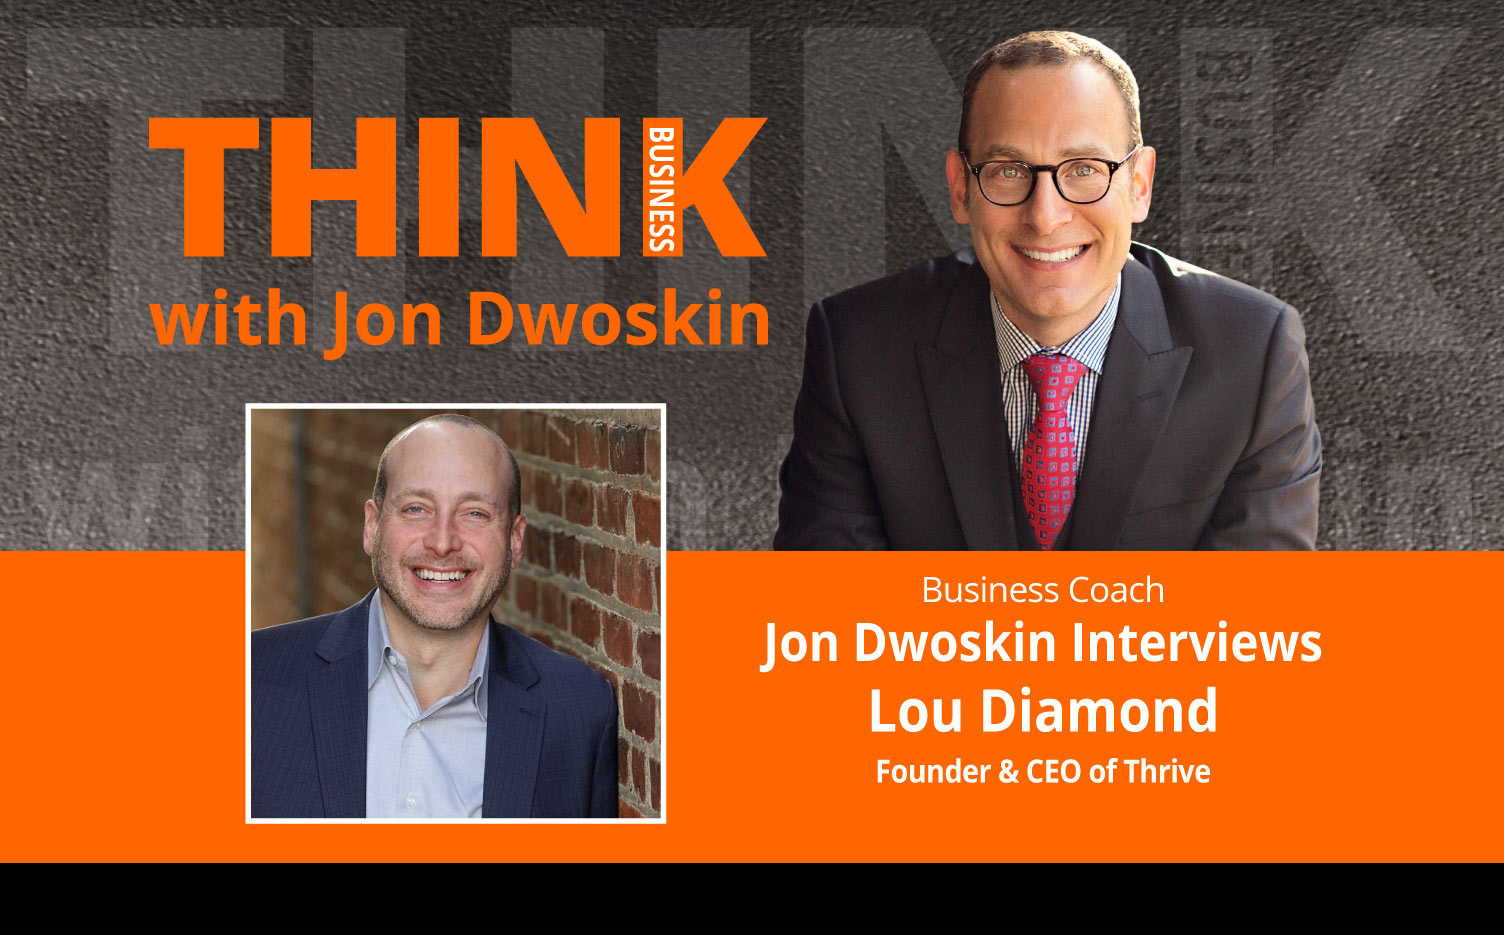 THINK Business Podcast: Jon Dwoskin Interviews Lou Diamond, Founder & CEO of Thrive